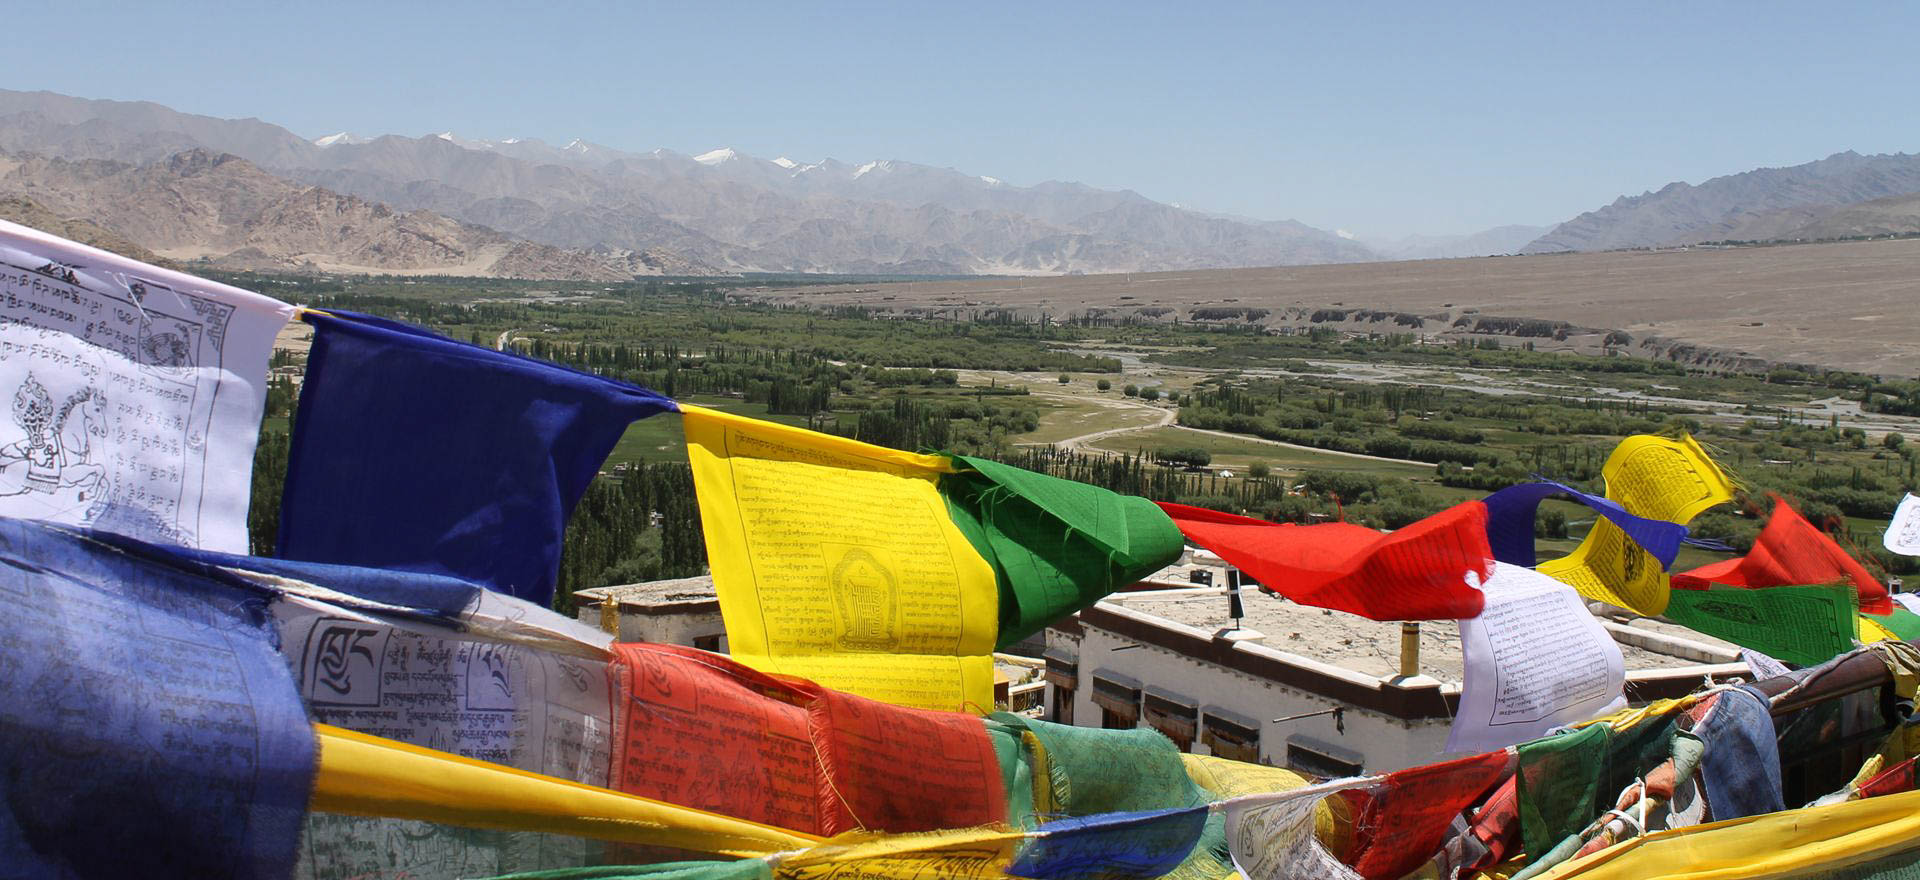 Prayer flags in the Himalaya Mountains - India Holidays and Tours